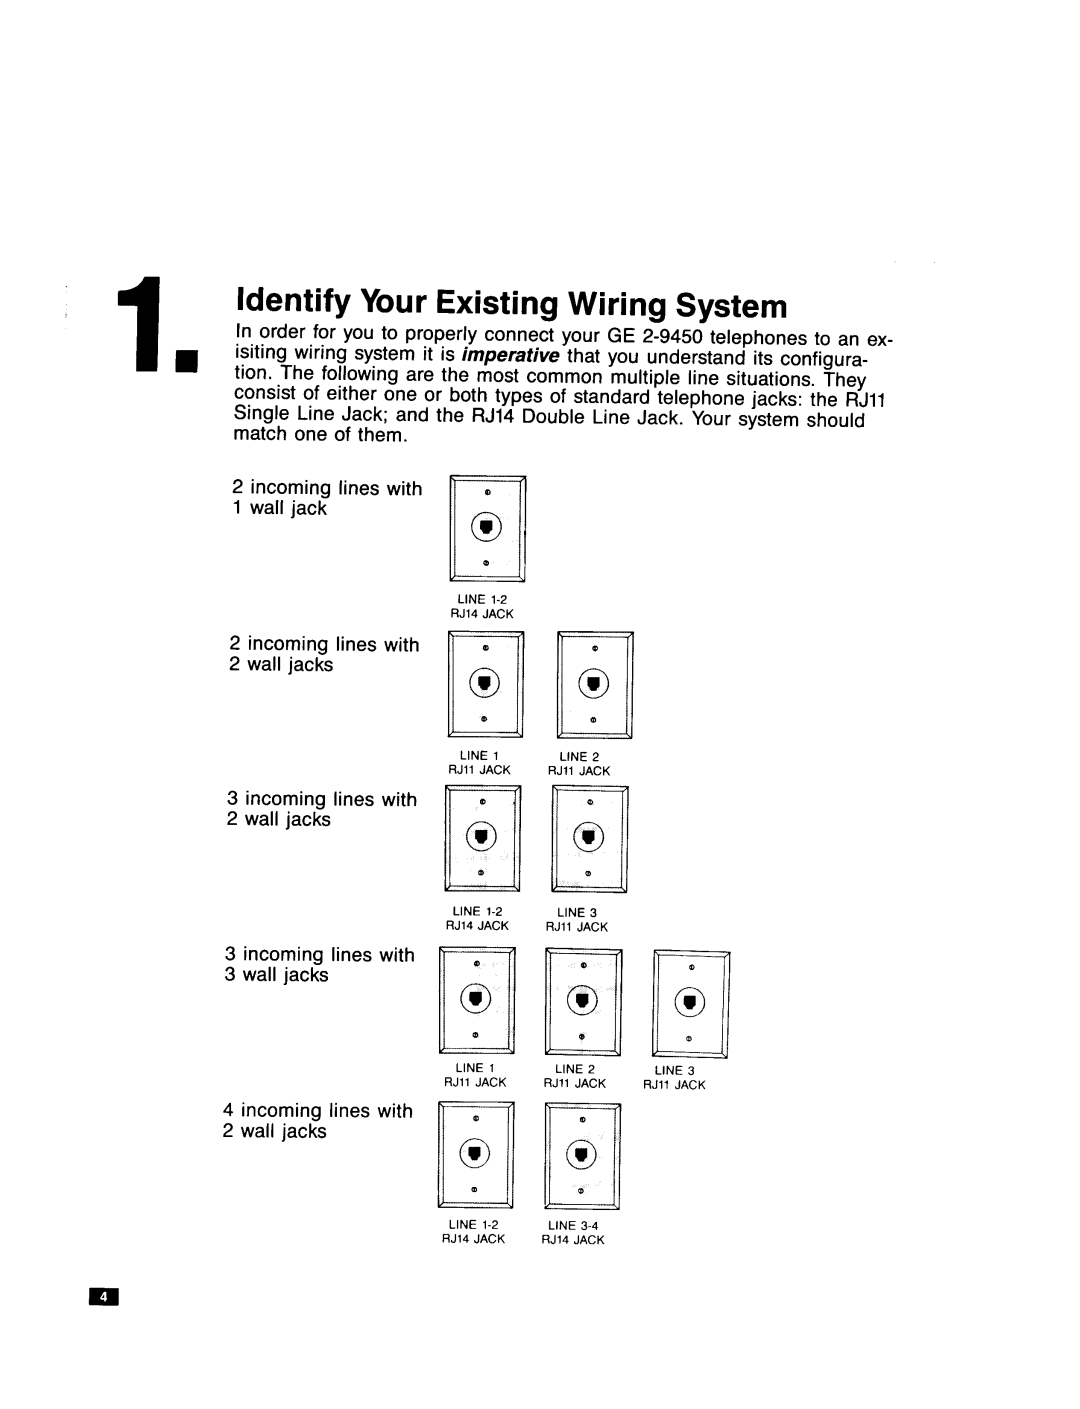 GE Feb-50 installation instructions Identify Your Existing Wiring System, is imperative that, om @, ow @ 